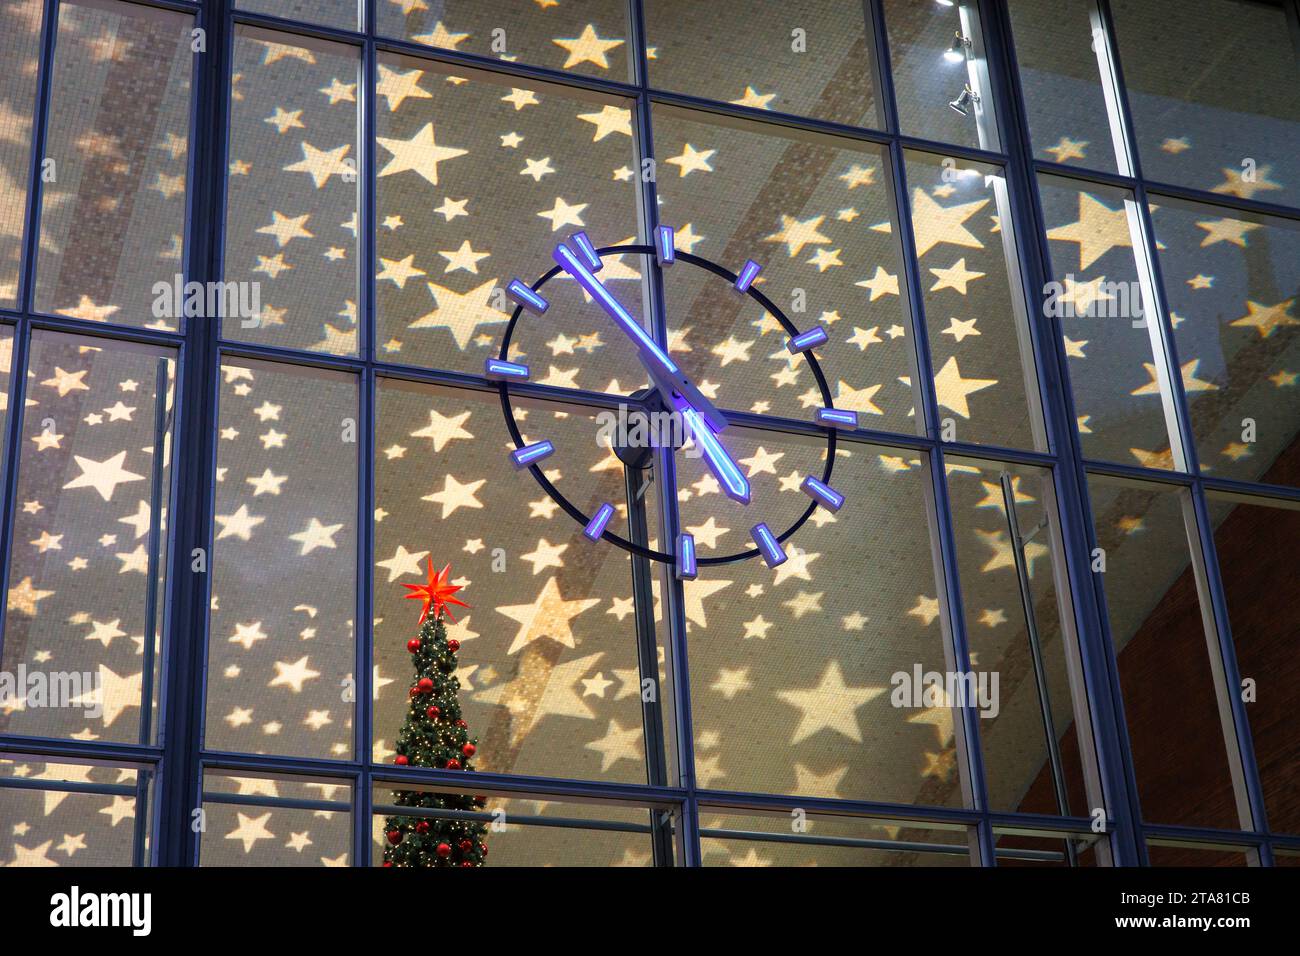 clock of the central station during Christmas time, Christmas illuminated ceiling, Cologne, Germany. Uhr am Hauptbahnhof waehrend der Weihnachtszeit, Stock Photo